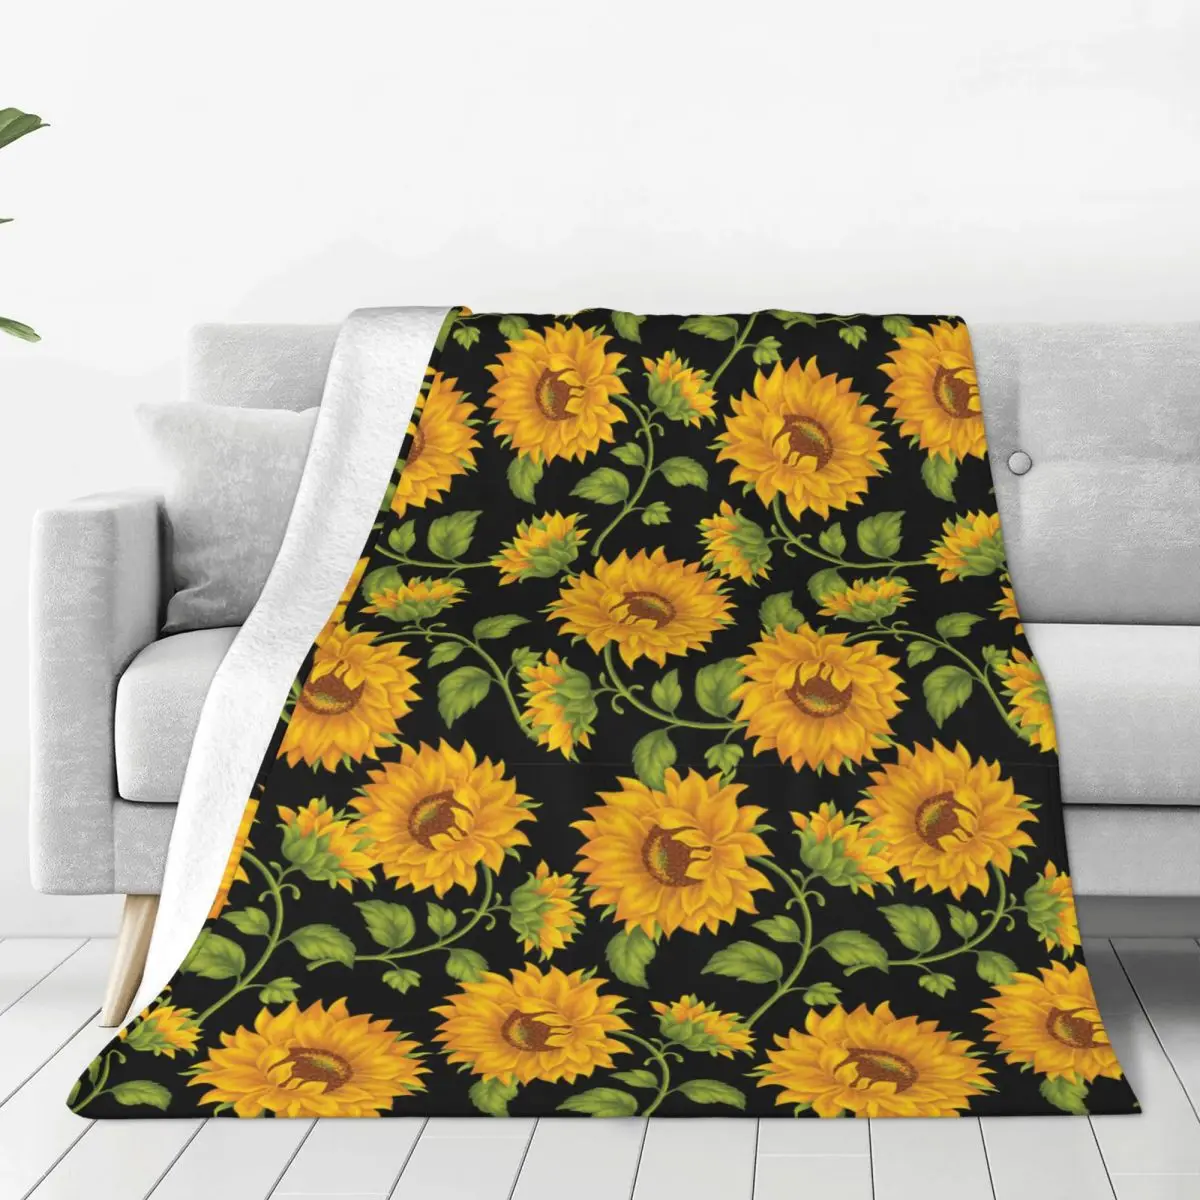 

Sunflowers Soft Fleece Throw Blanket Warm and Cozy for All Seasons Comfy Microfiber Blanket for Couch Sofa Bed 40"x30"